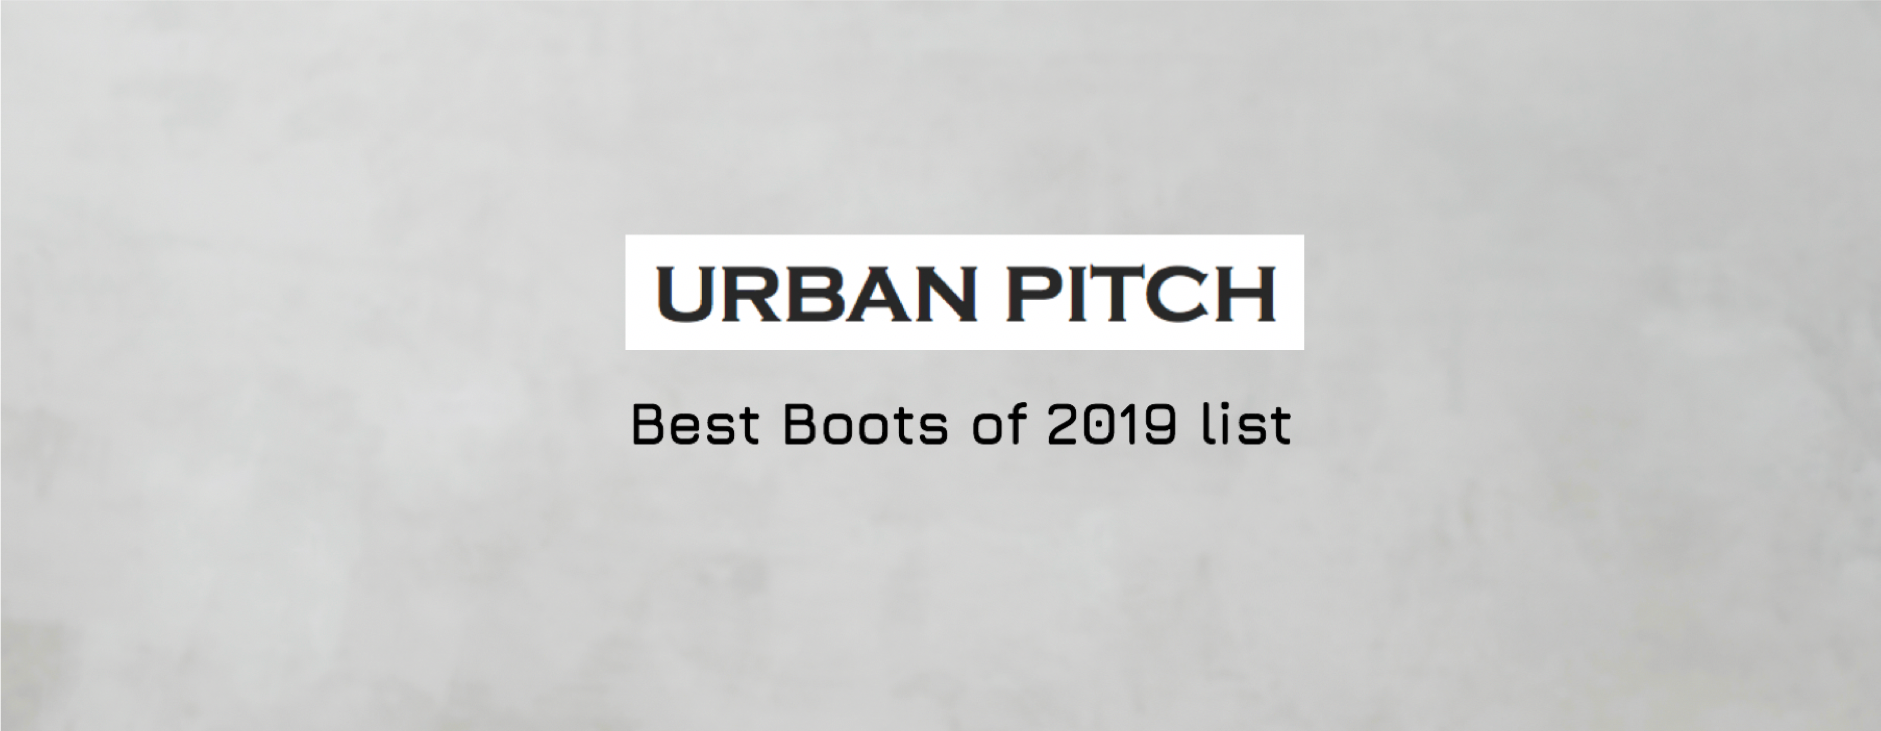 Named one of the Best Boots of 2019 by URBAN PITCH